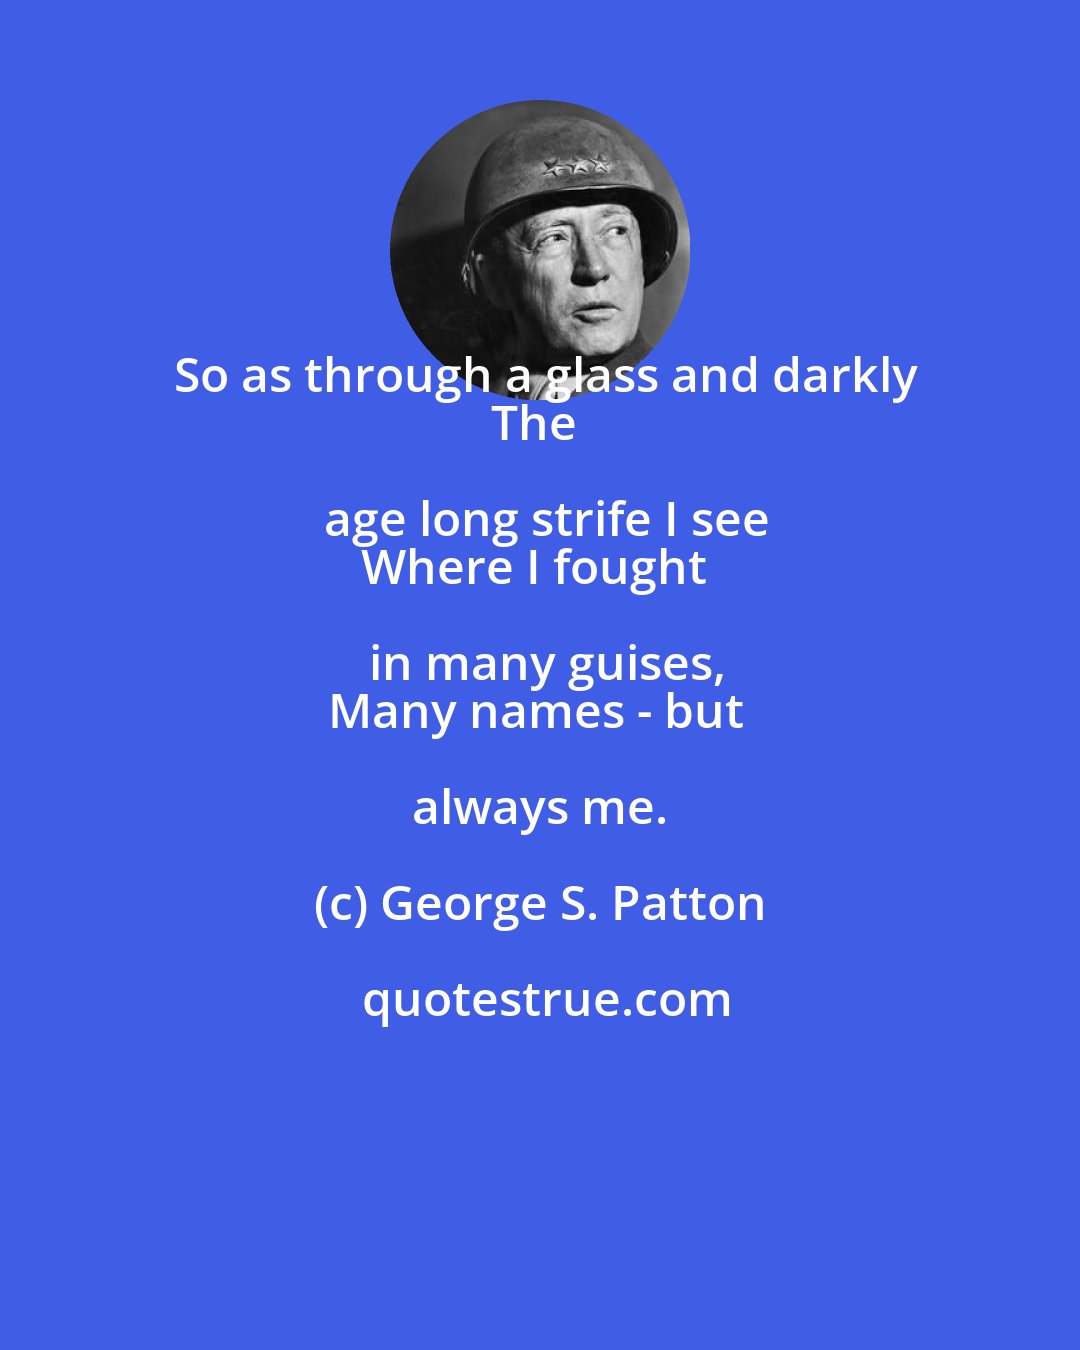 George S. Patton: So as through a glass and darkly
The age long strife I see
Where I fought in many guises,
Many names - but always me.